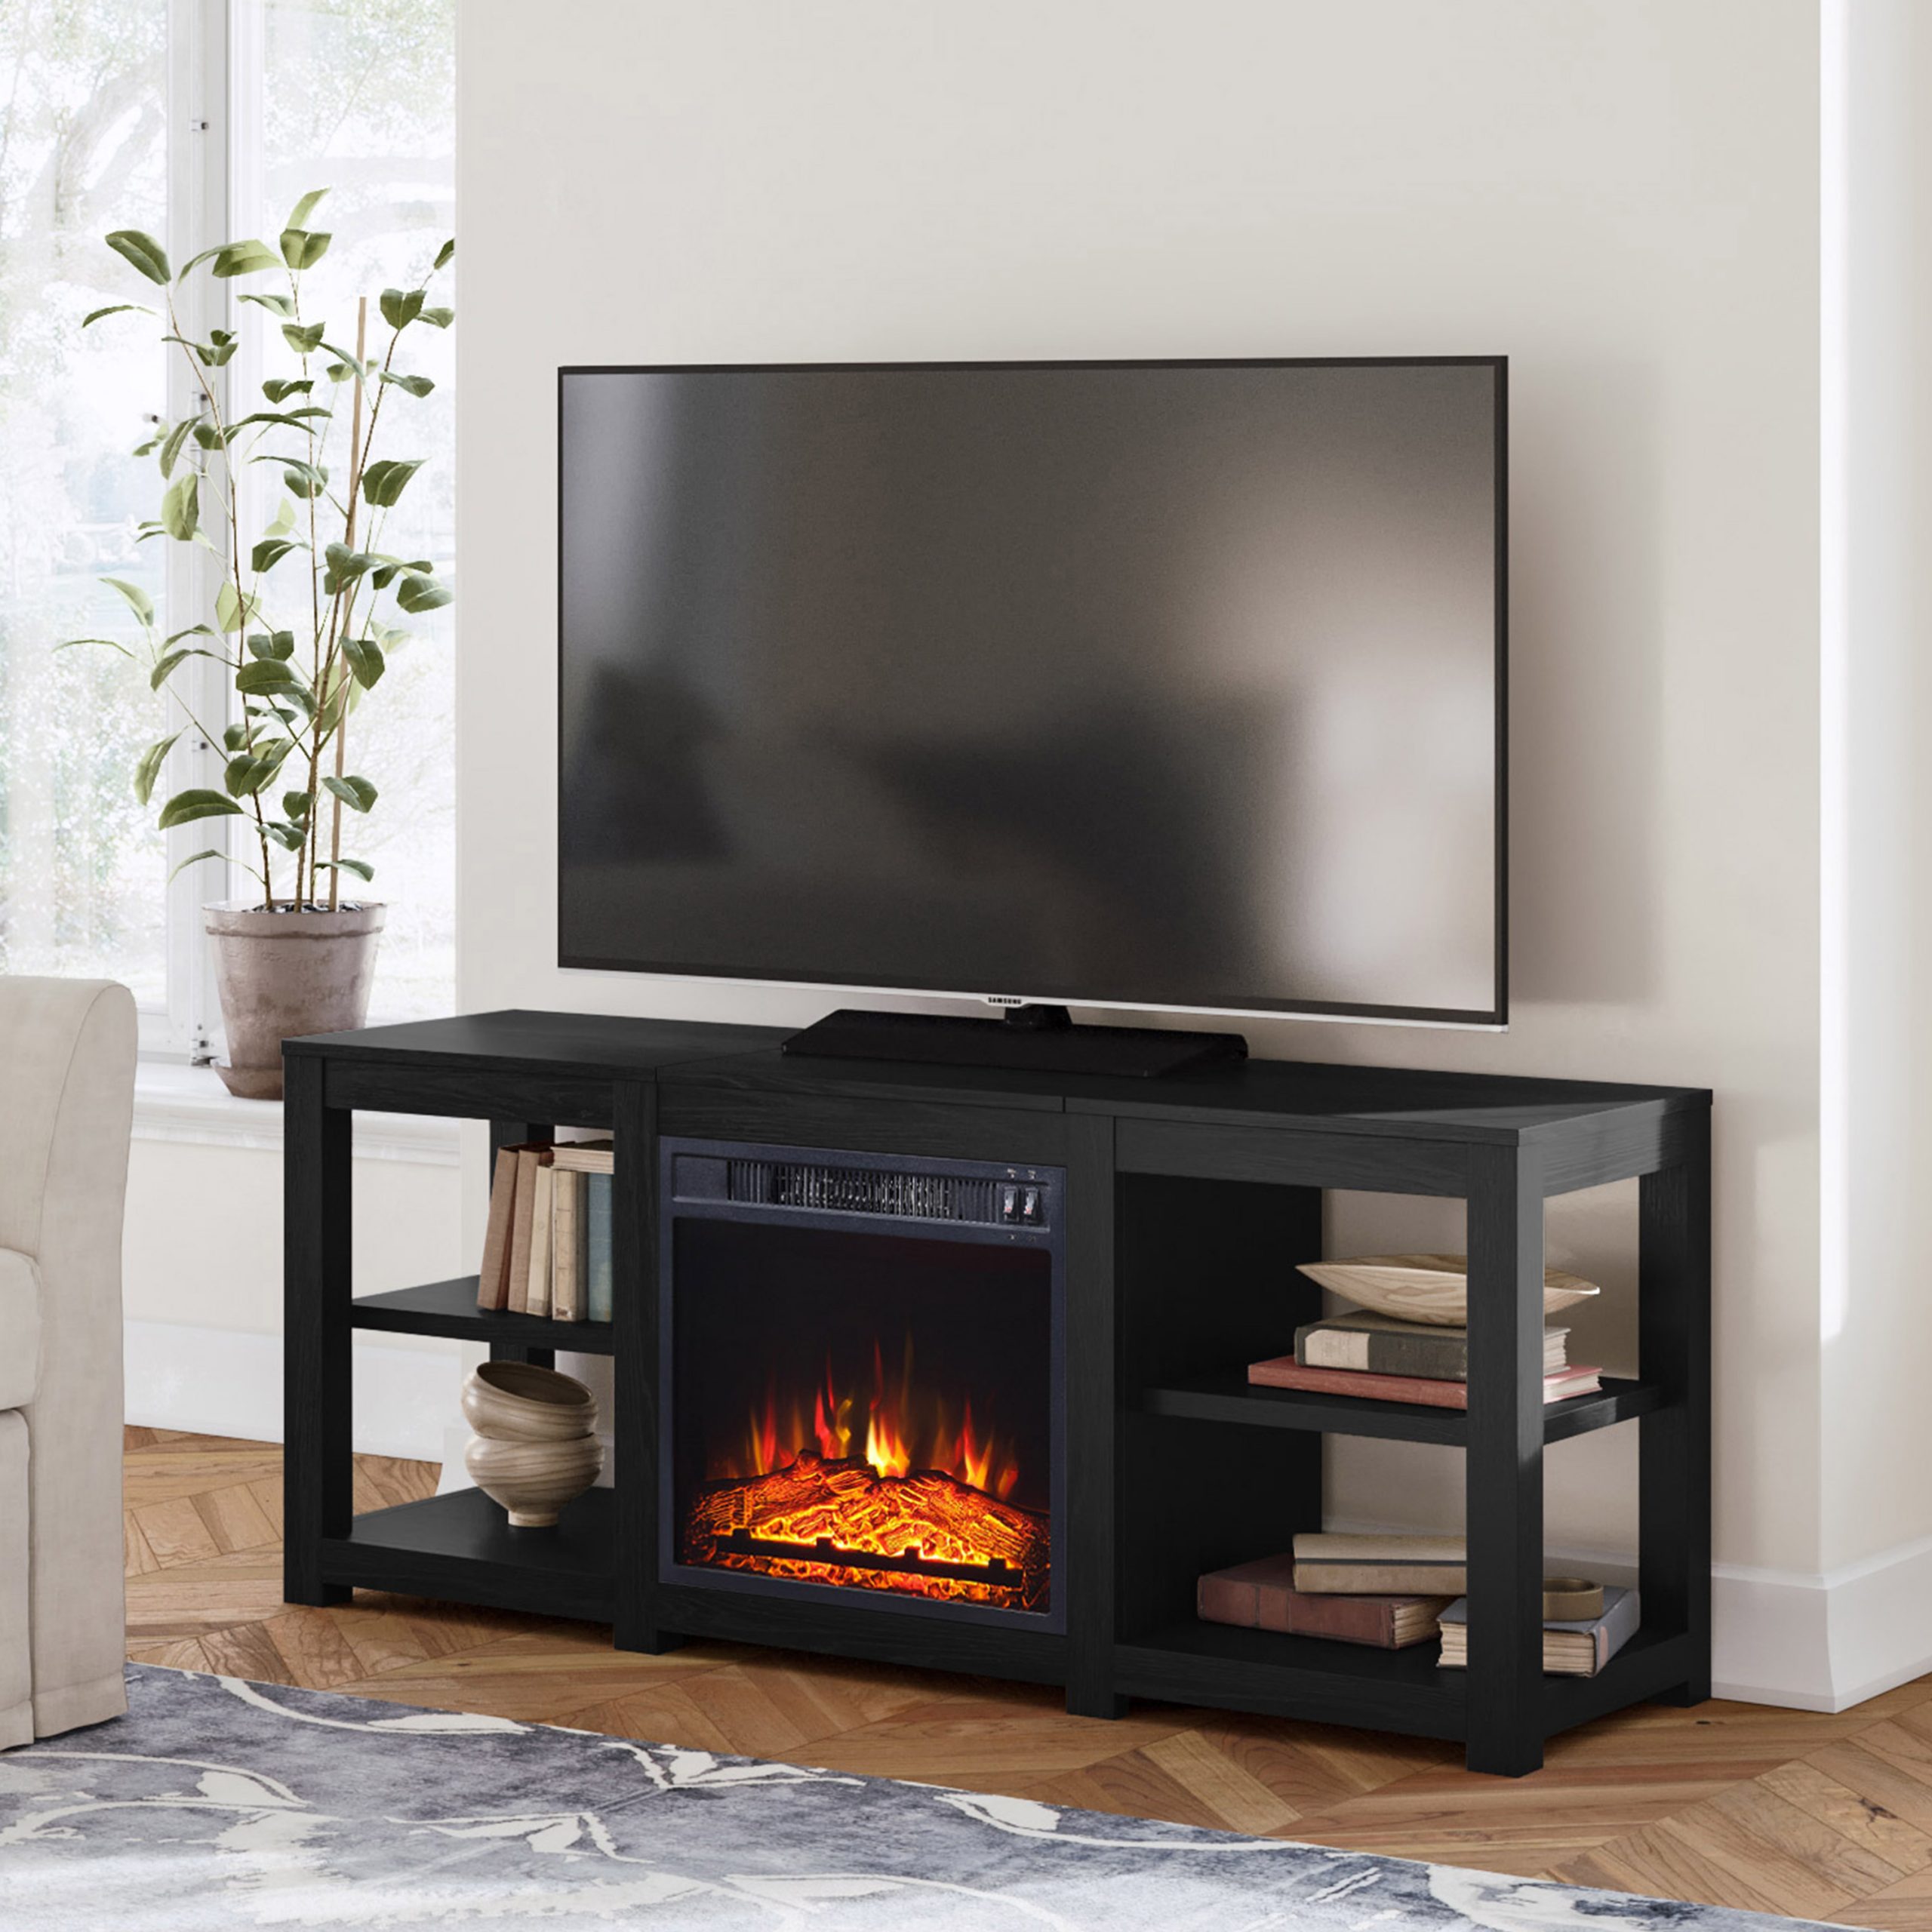 Mainstays Fireplace TV Stand for TVs up to 65" Black Oak 